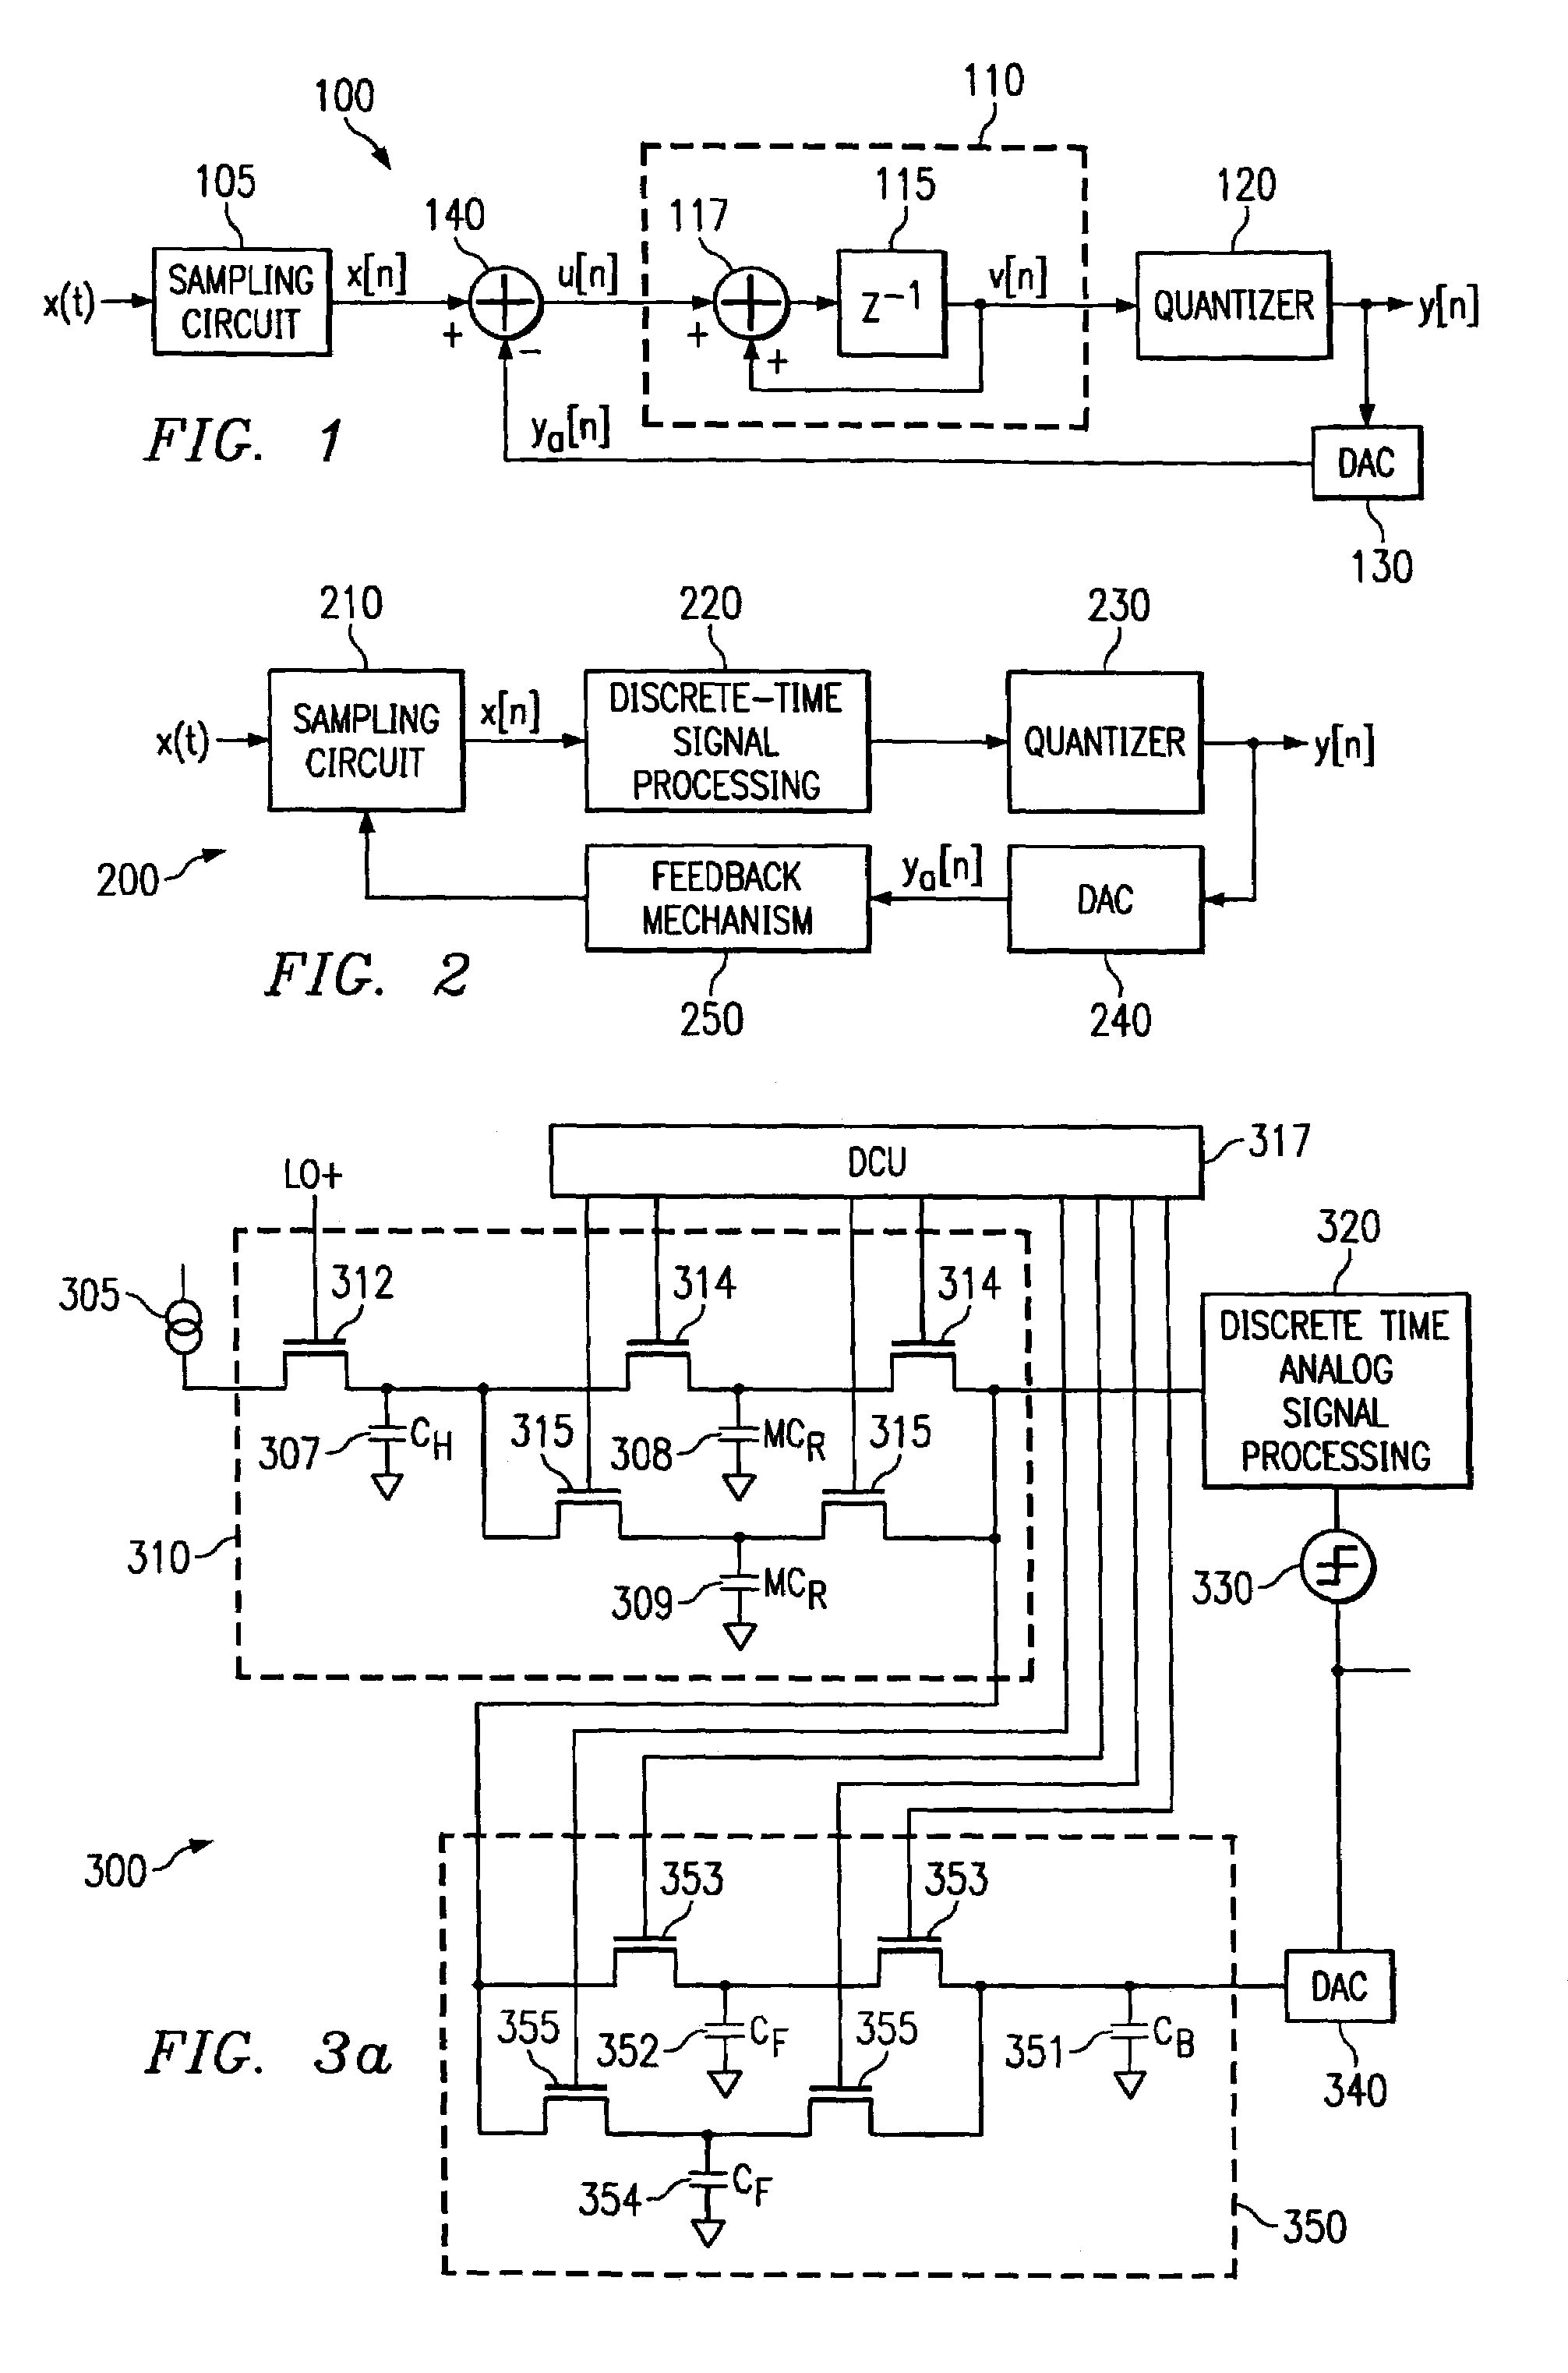 Sigma-delta (SigmaDelta) analog-to-digital converter (ADC) structure incorporating a direct sampling mixer